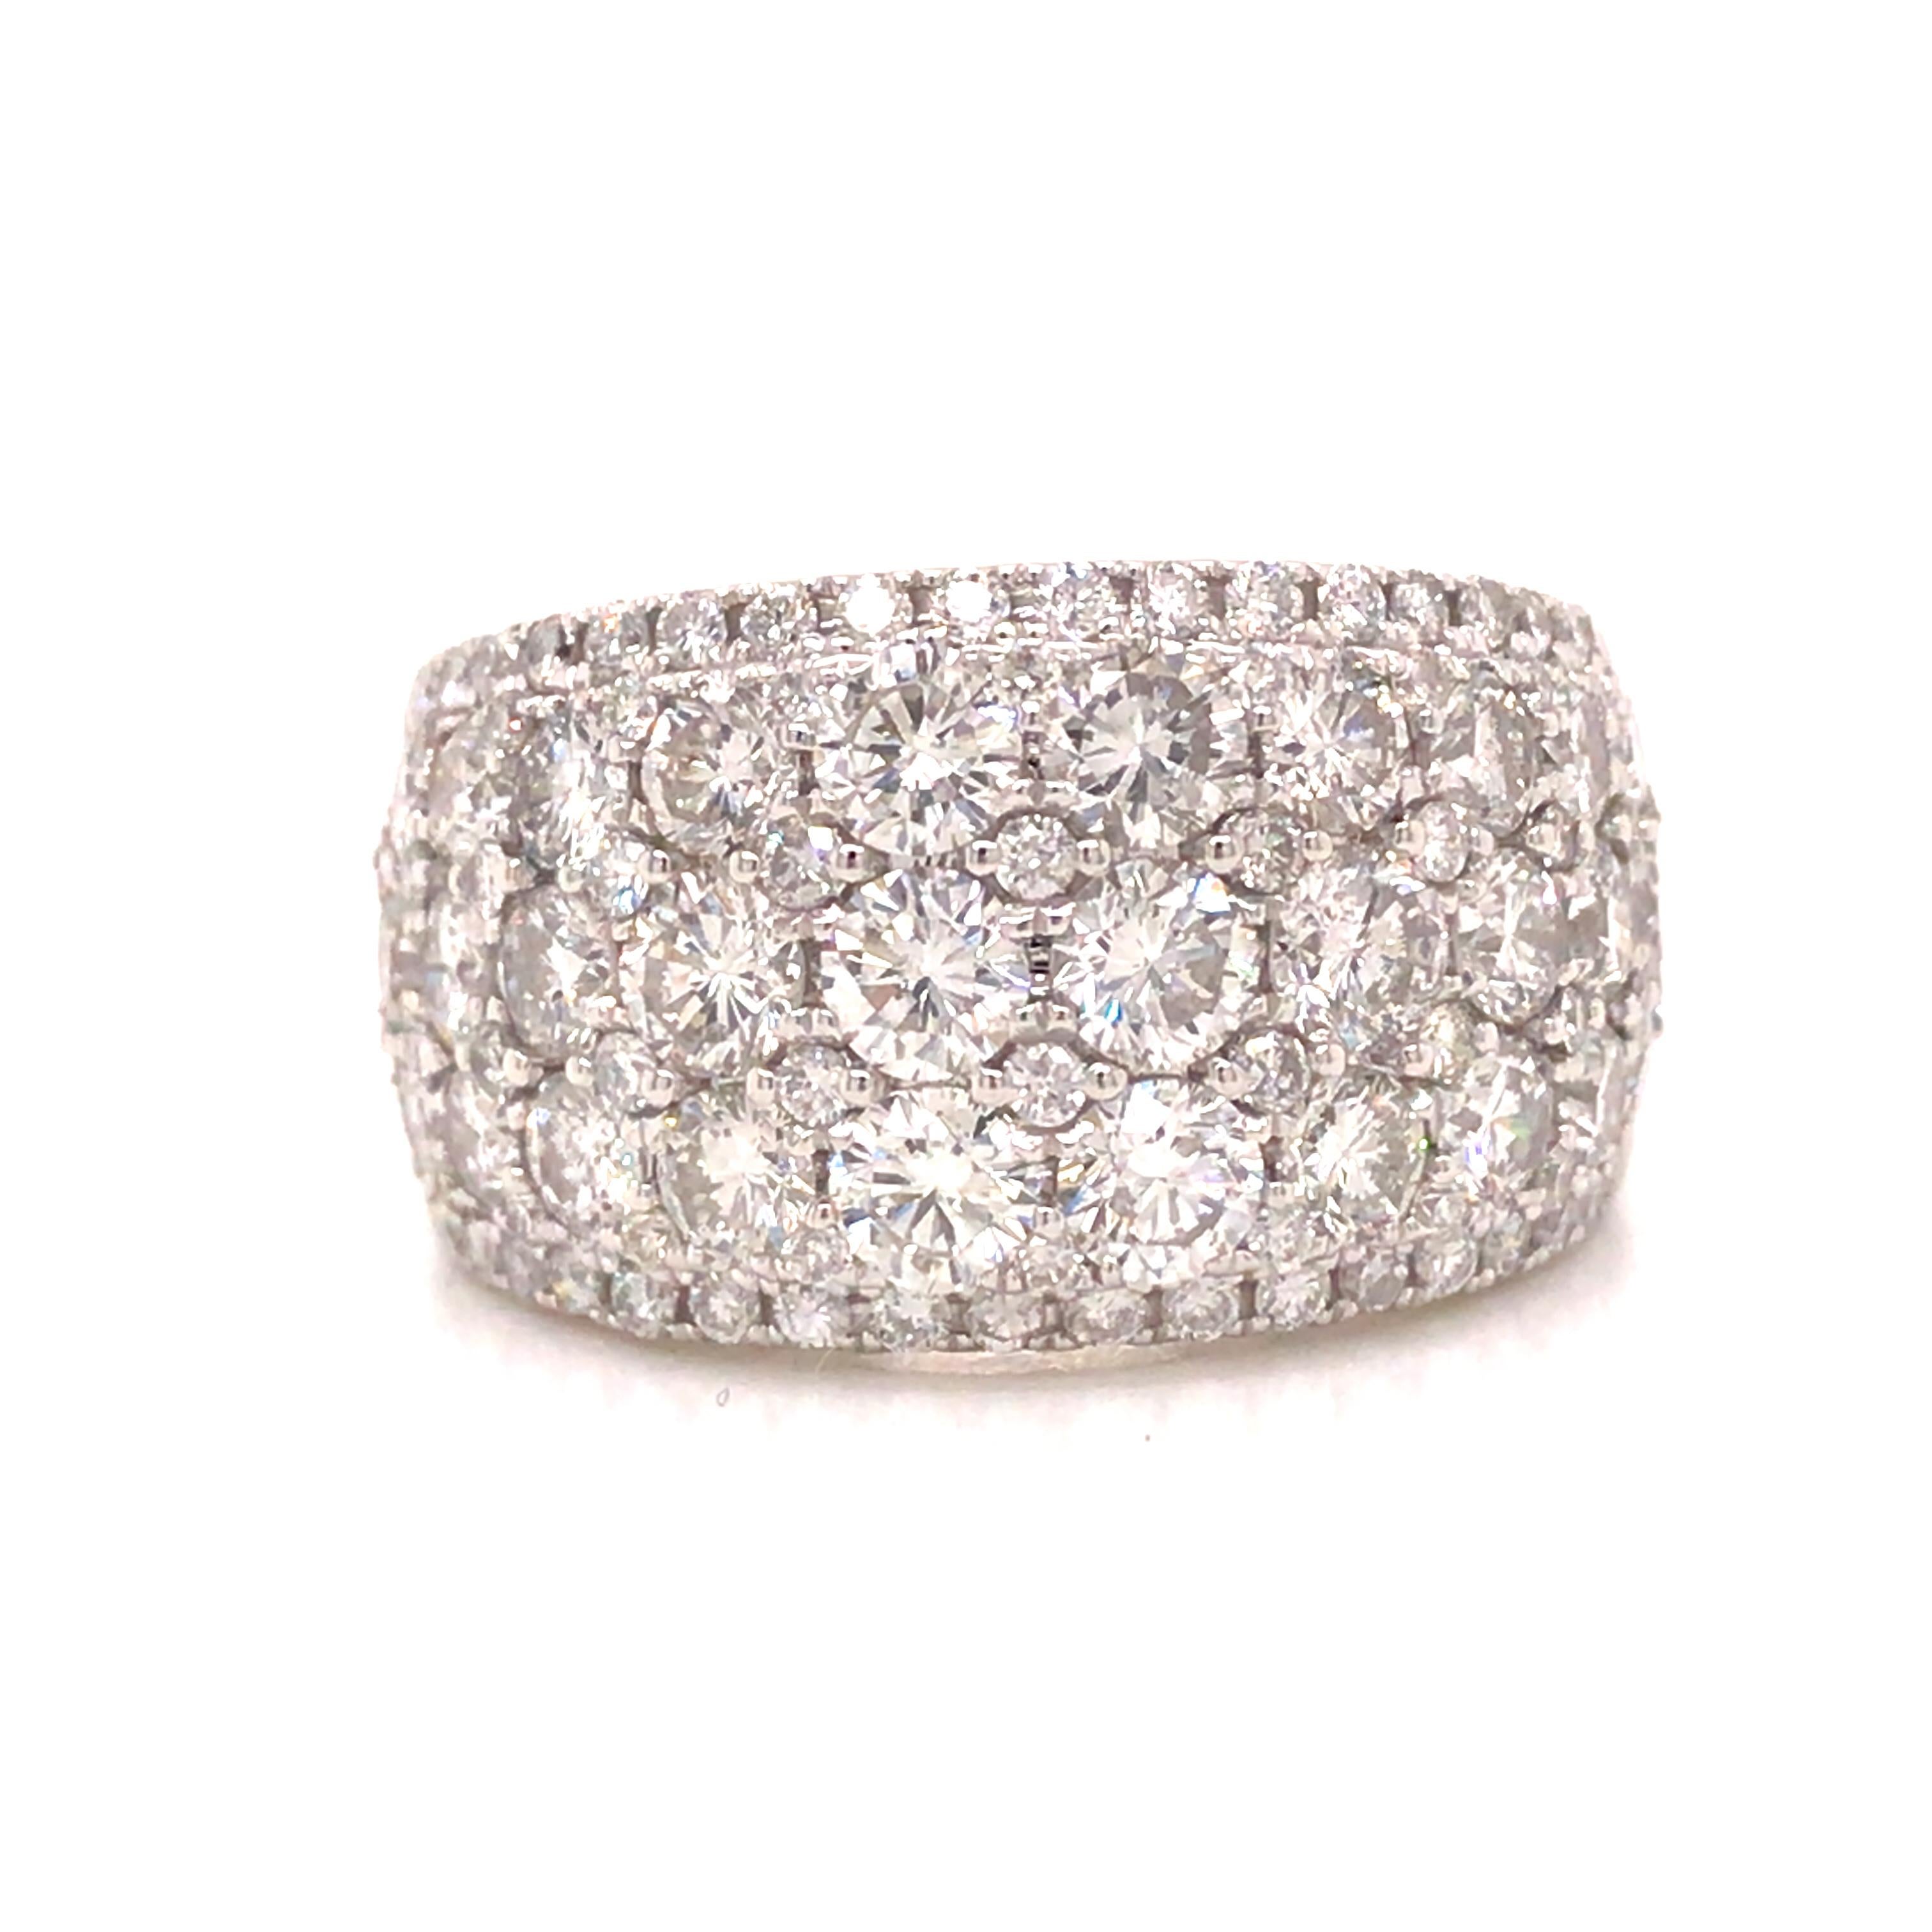 Wide Diamond Band in 18K White Gold.  Round Brilliant Cut Diamonds weighing 3.65 carat total weight, G-H in color and VS-SI in clarity are expertly set.  The Band measures 7/16 inch in width.  Ring size 6. 9.48 grams.